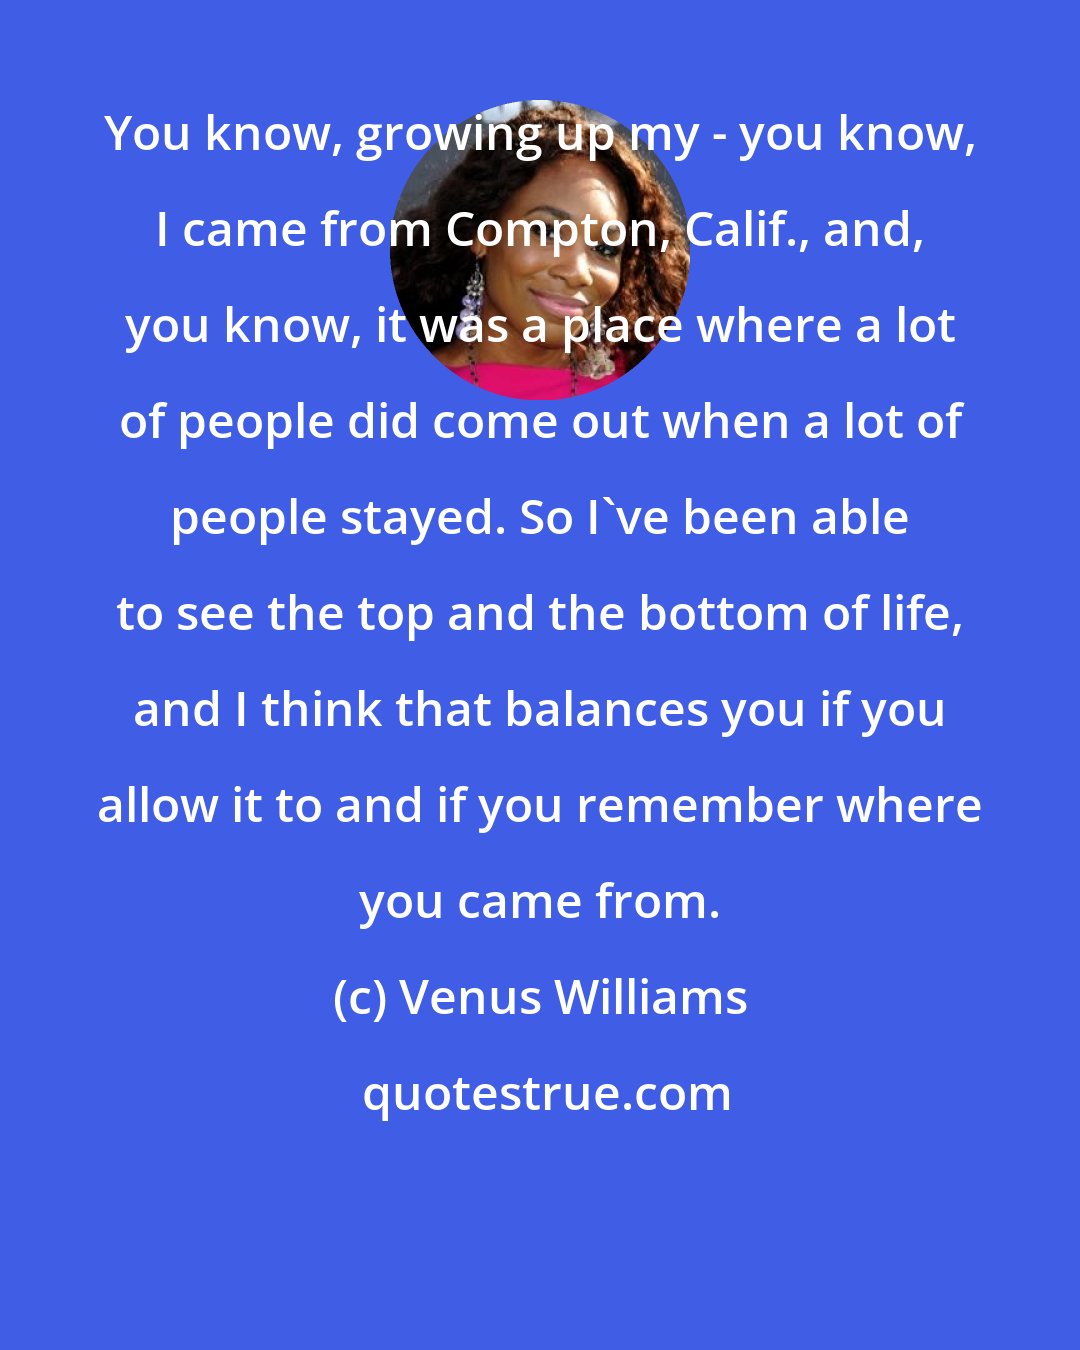 Venus Williams: You know, growing up my - you know, I came from Compton, Calif., and, you know, it was a place where a lot of people did come out when a lot of people stayed. So I've been able to see the top and the bottom of life, and I think that balances you if you allow it to and if you remember where you came from.